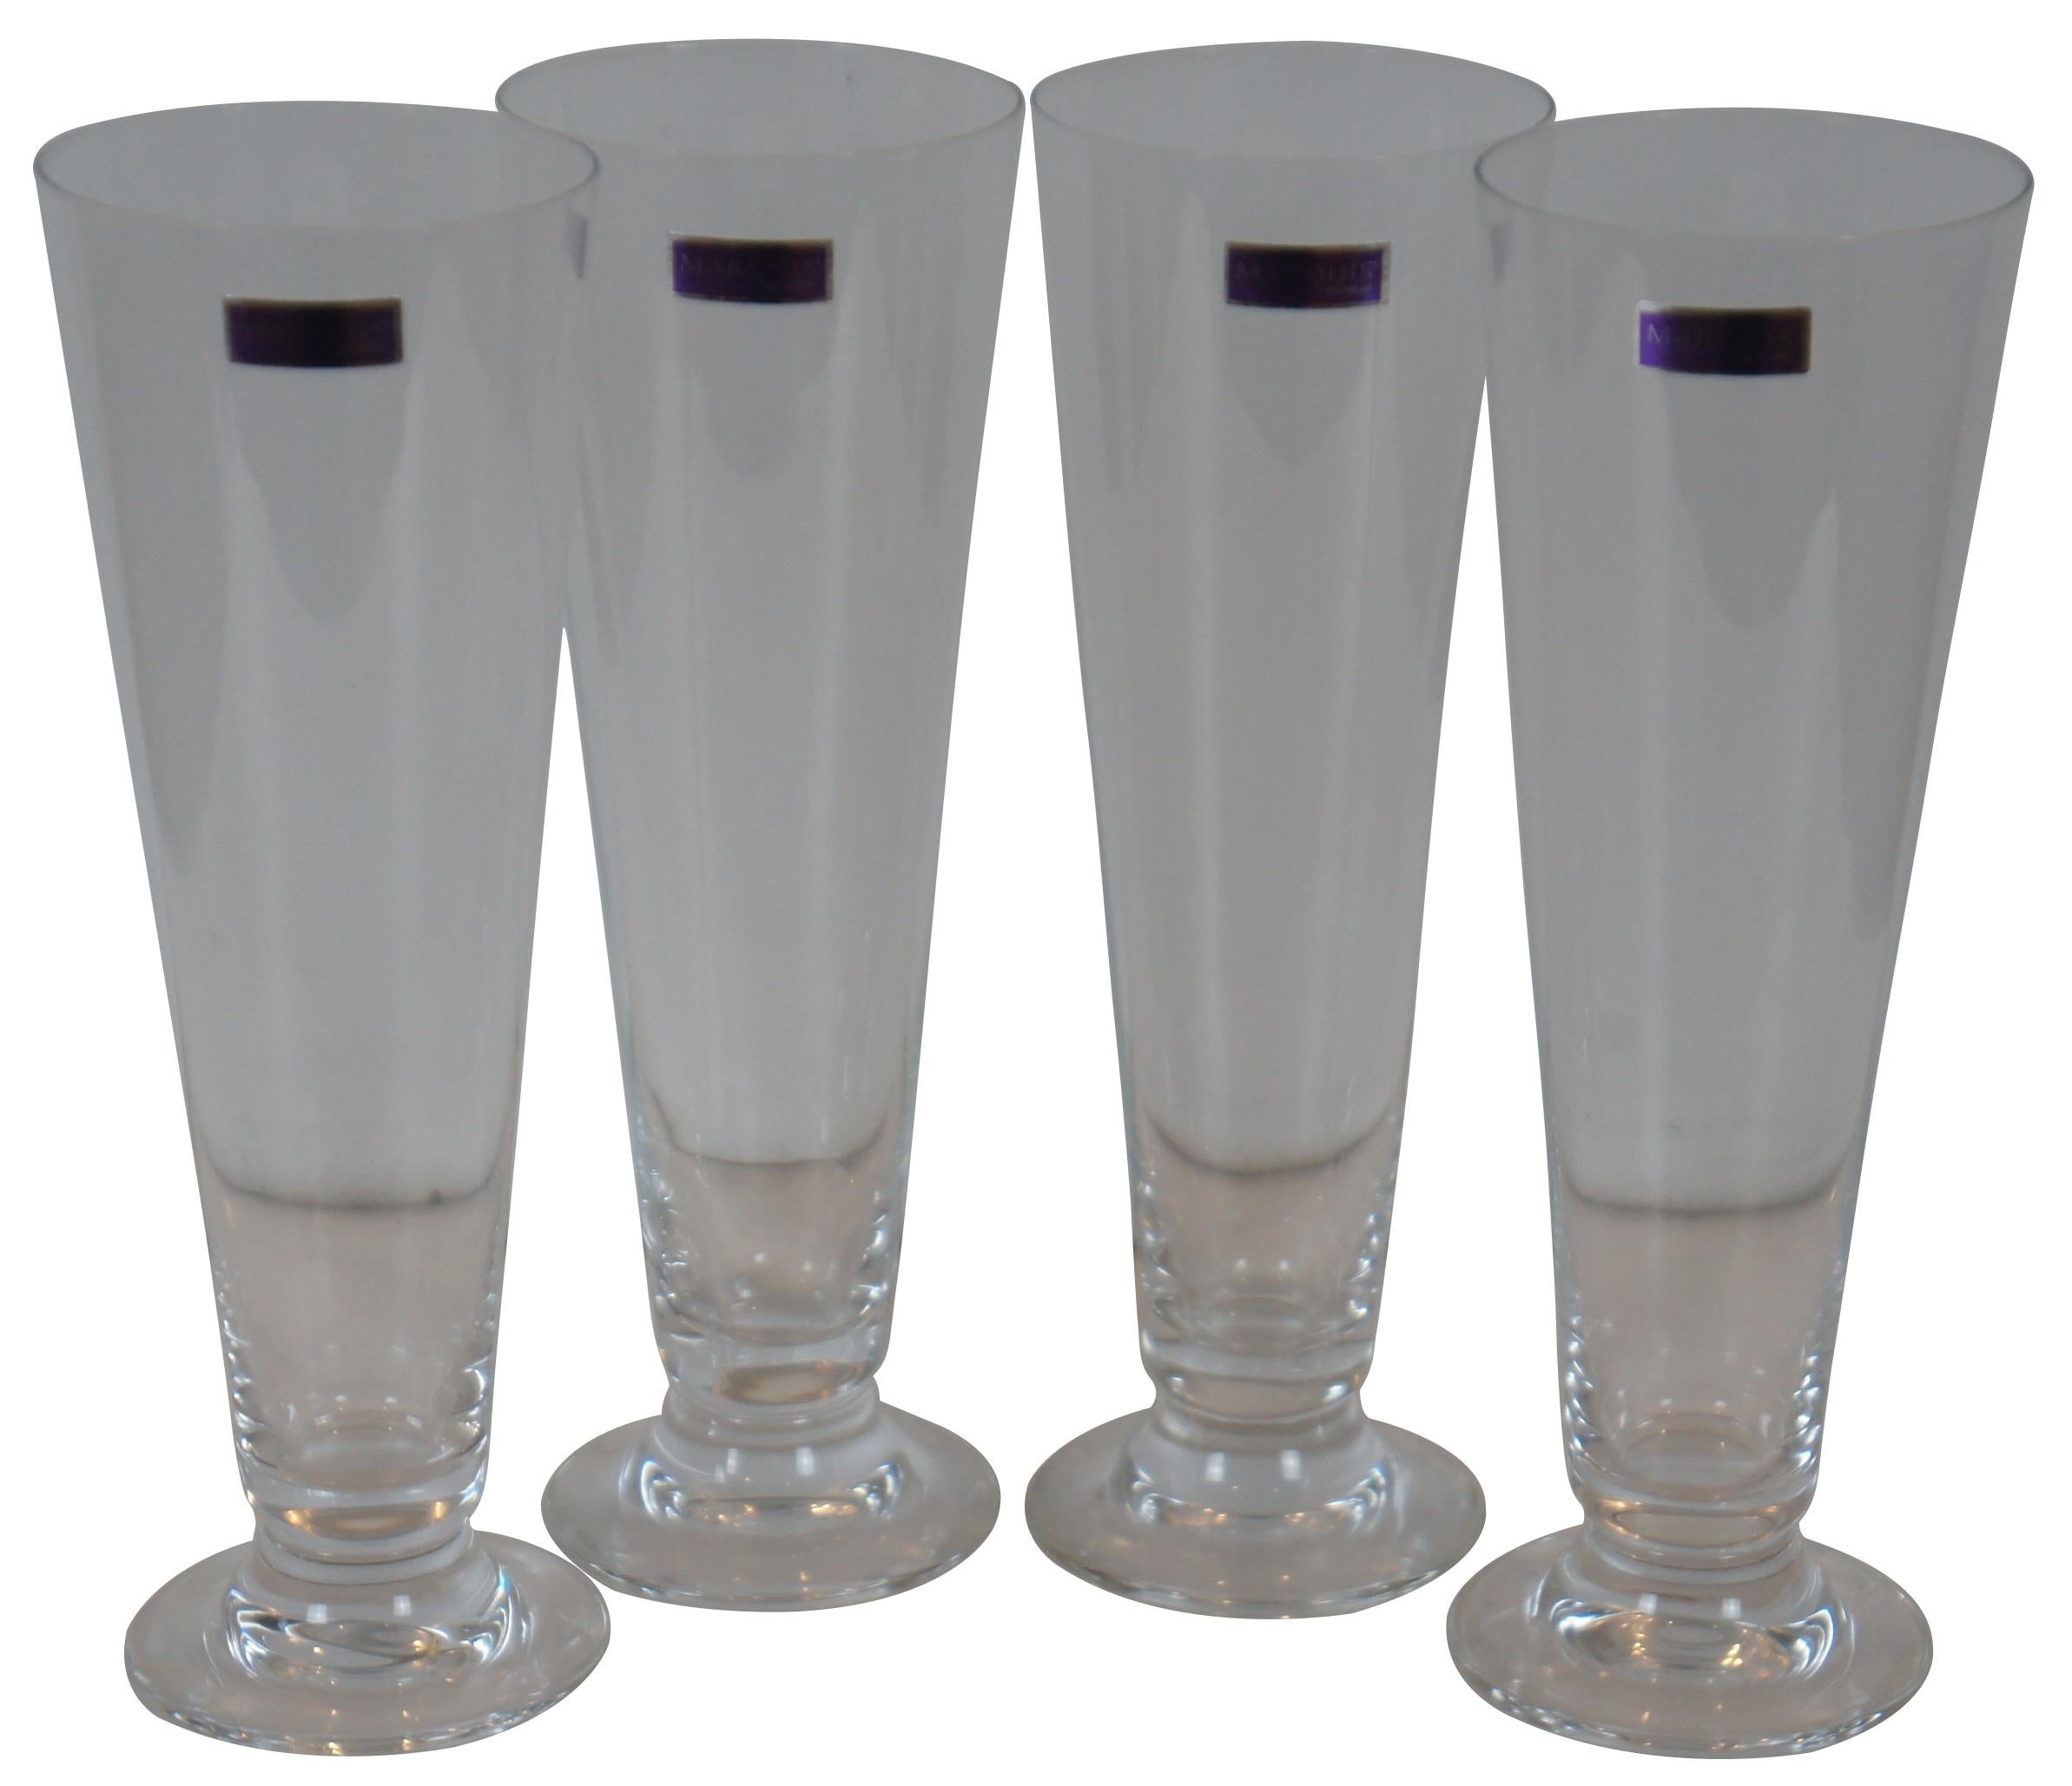 2 Sets Available 
Marquis Vintage Pilsner glass set of 4 by Waterford

Clean and contemporary, the Vintage Entertaining Collection from Marquis by Waterford is characterized by modern styling and full-bodied elegance.
 